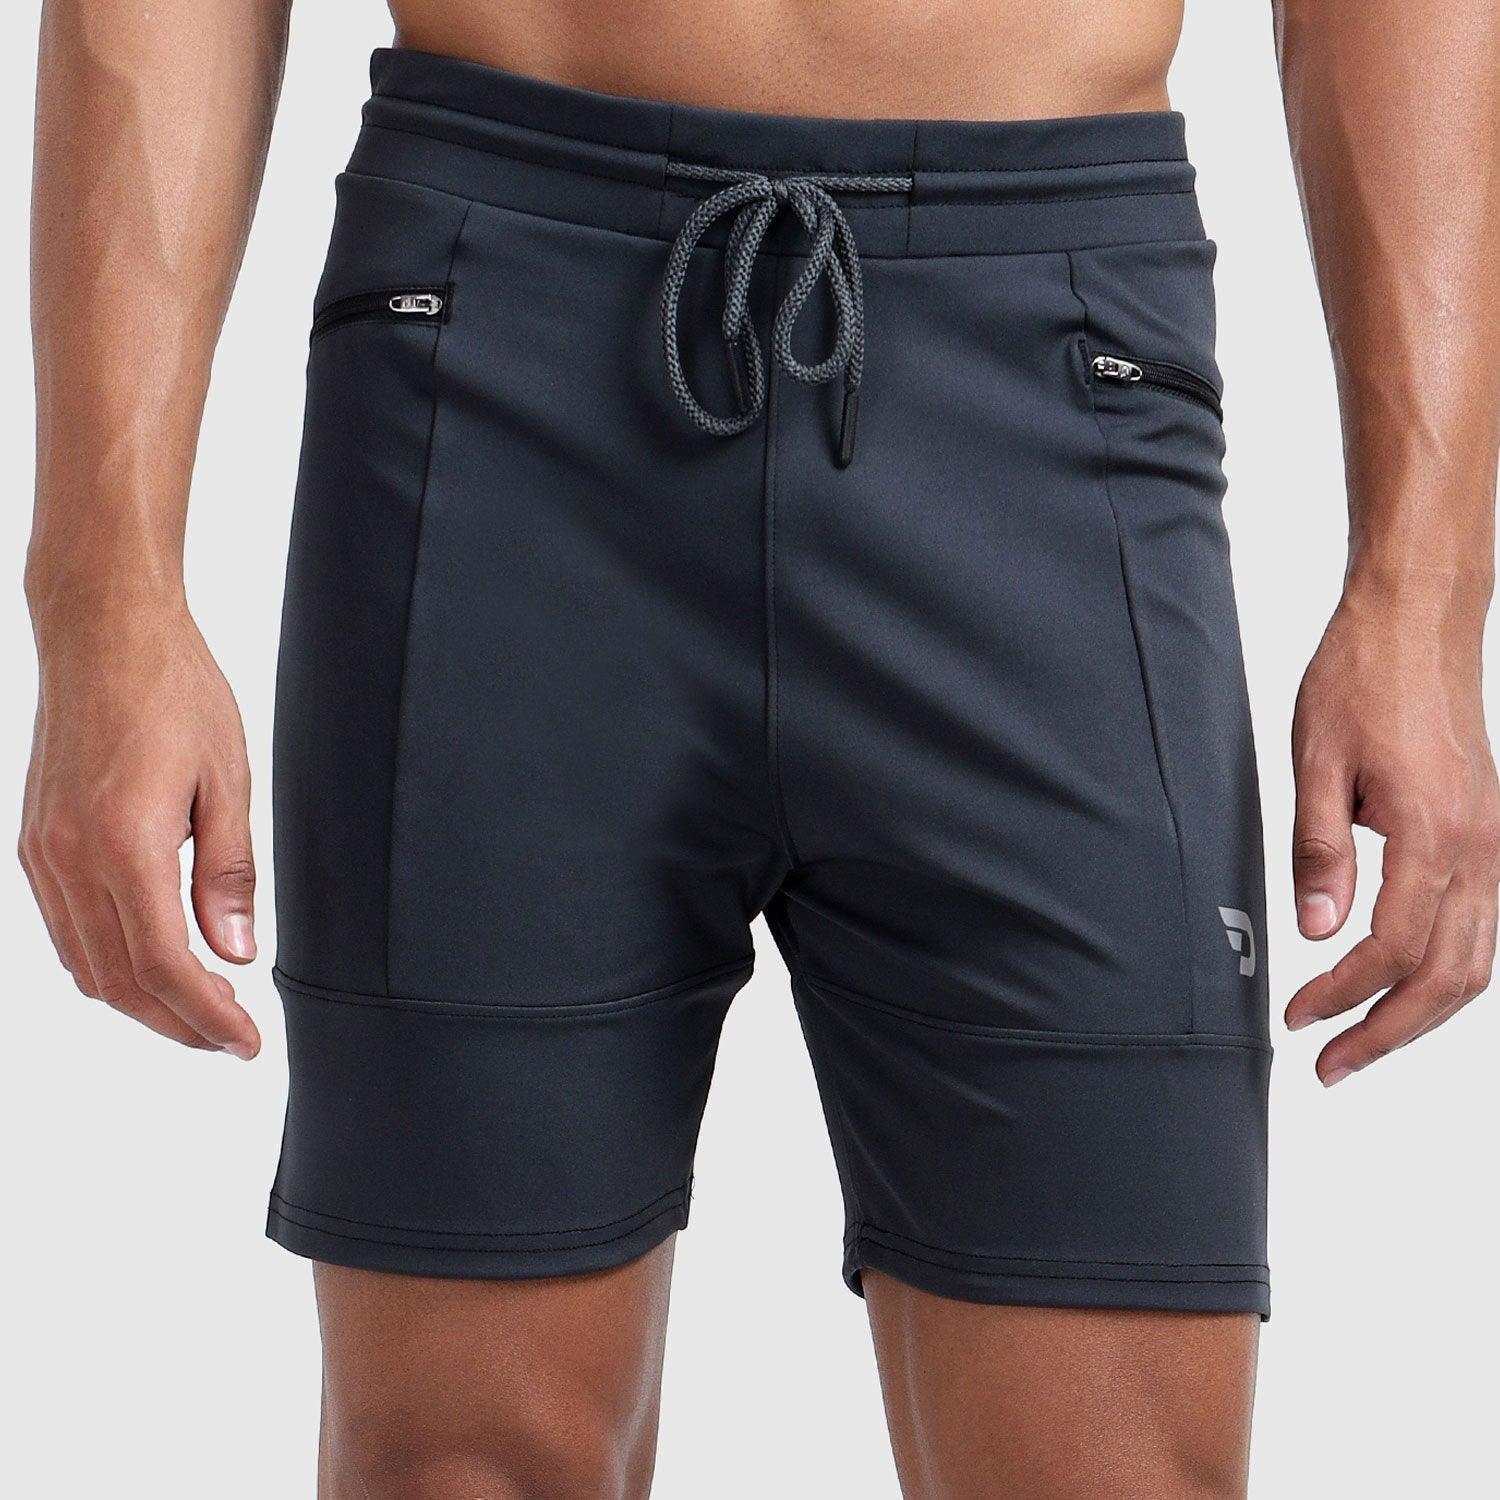 Denmonk's fashionable Power Shorts charcoal shorts for men will boost your level of gym fitness.